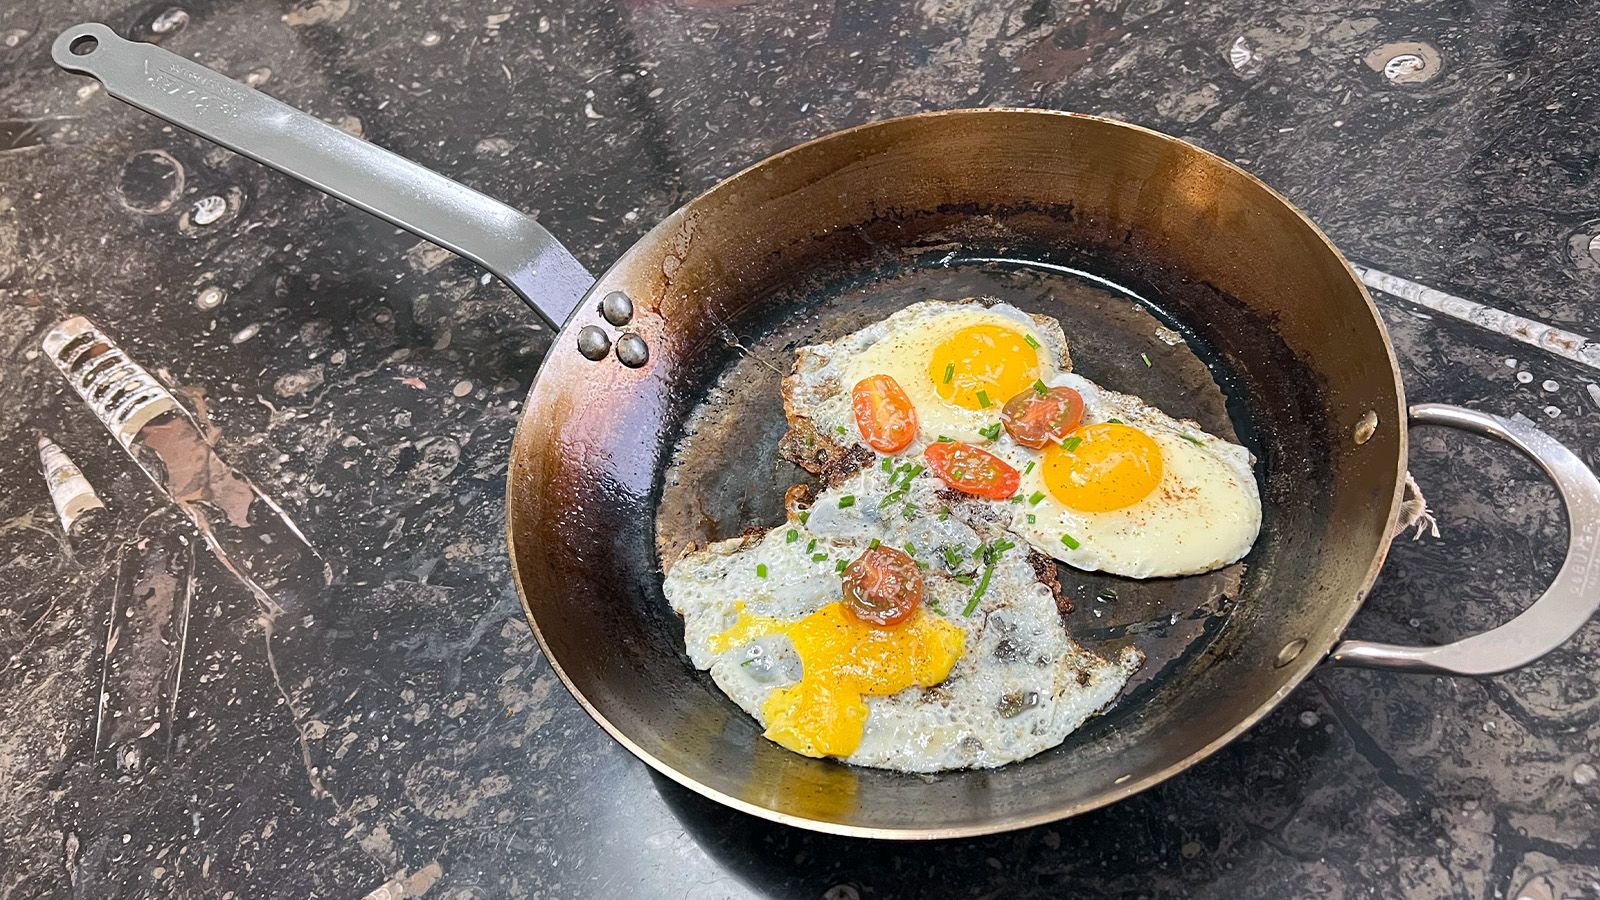 Cuisinart Carbonware Carbon-Steel Frying Pan Review: Affordable